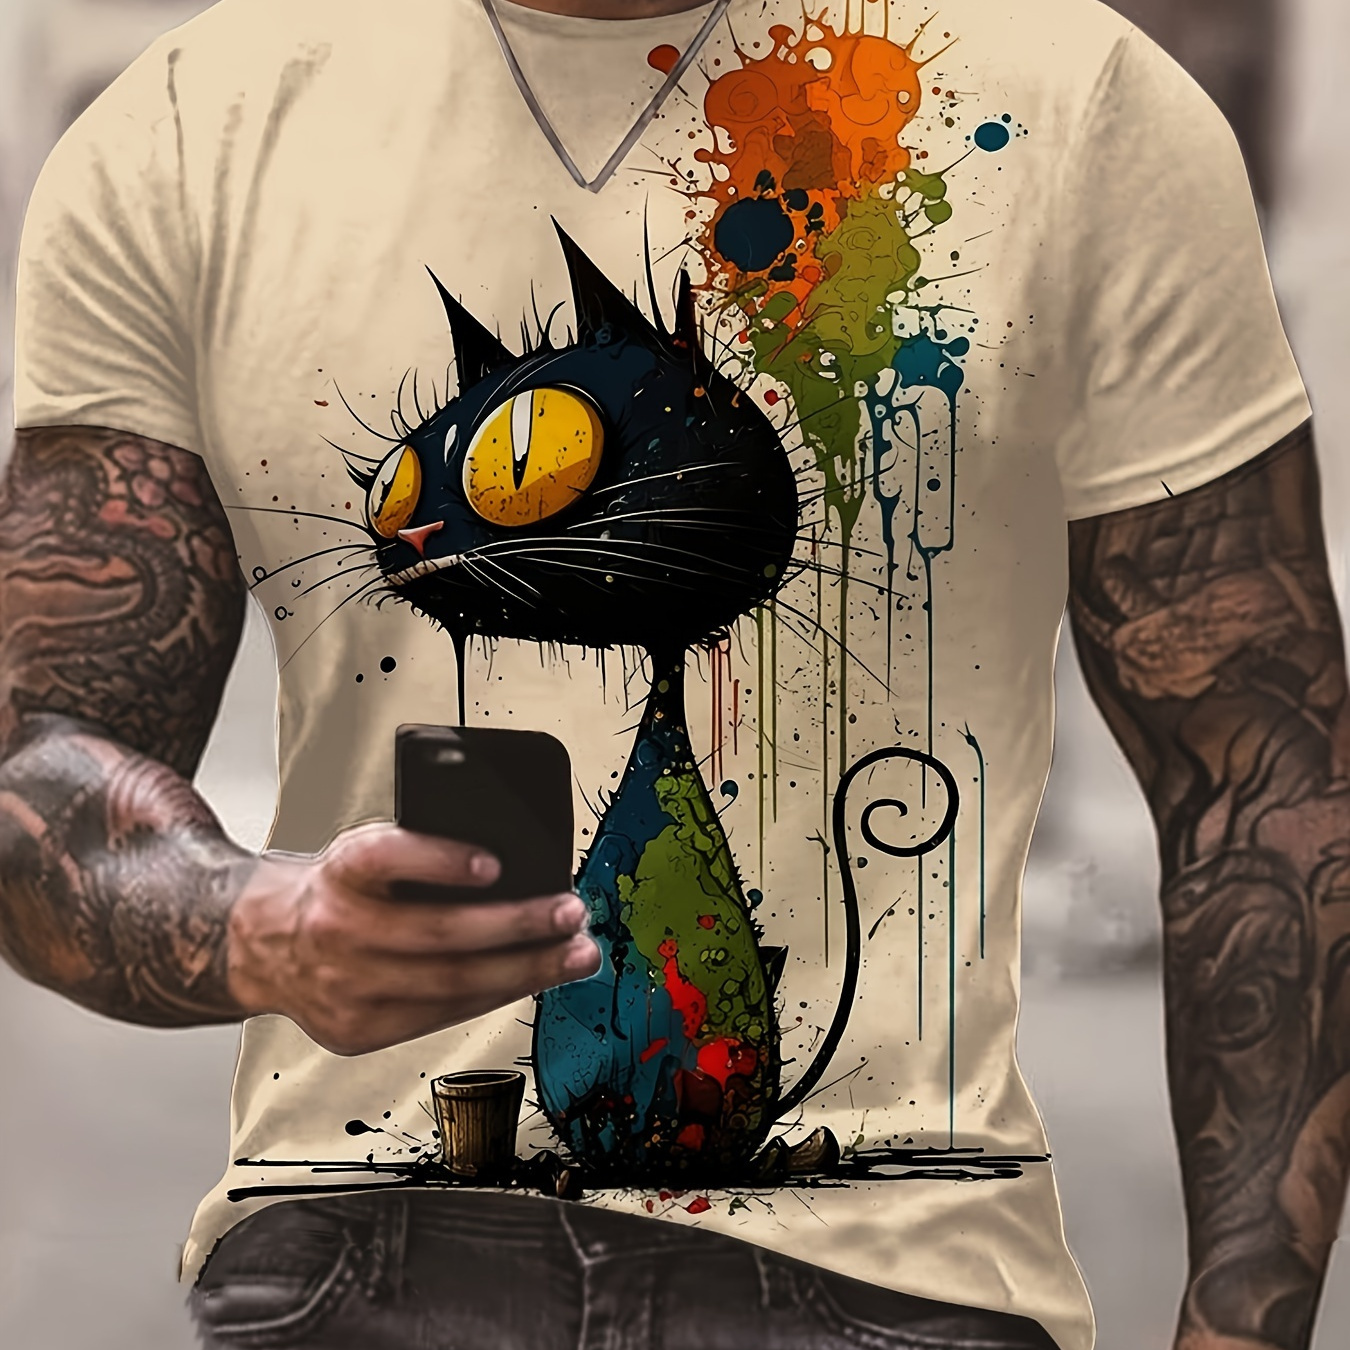 

Men's Animation Cat Graffiti Pattern And Paint Mark Print Crew Neck And Short Sleeve T-shirt, Casual And Stylish Tops Suitable For Summer Leisurewear, Tops As Gifts